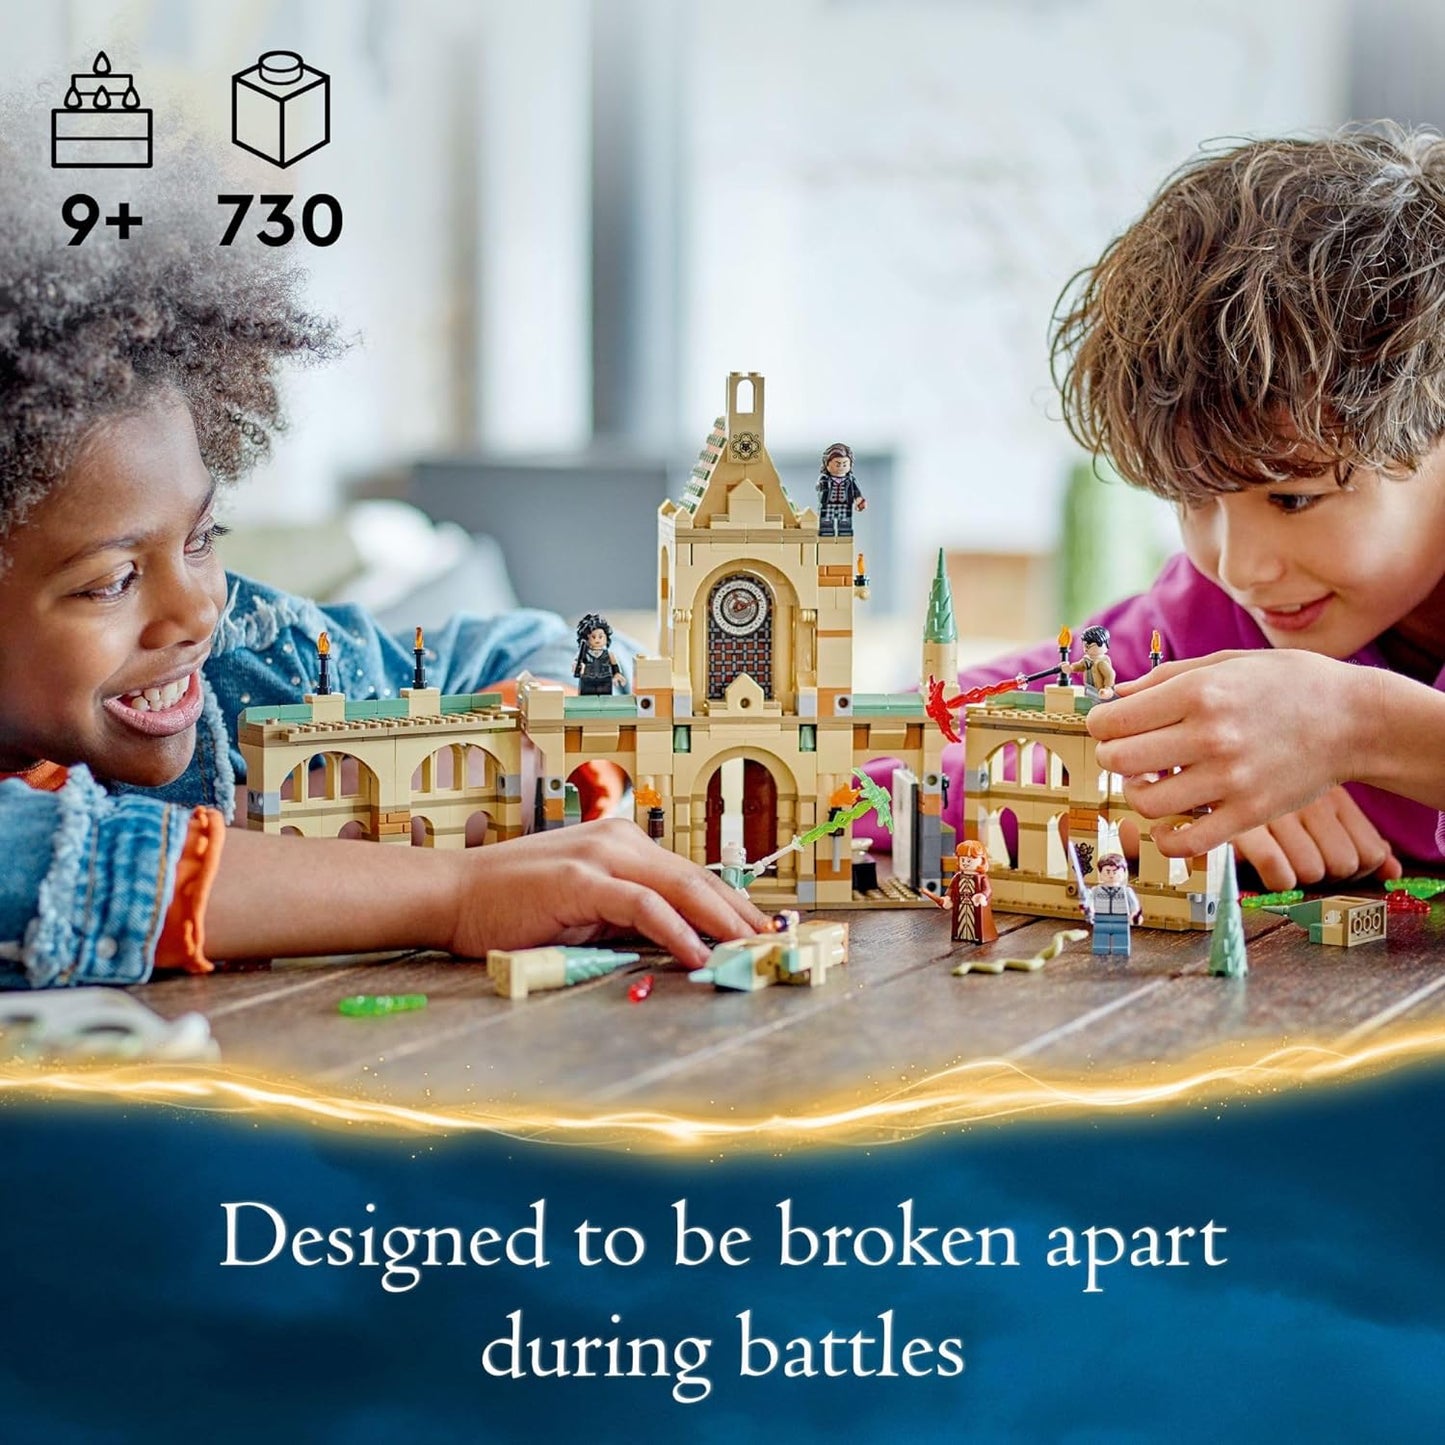 LEGO Harry Potter The Battle of Hogwarts Building Toy Set, Harry Potter Toy for Boys, Girls and Kids Ages 9+, Features a Buildable Castle Section and 6 Minifigures to Recreate an Iconic Scene, 76415